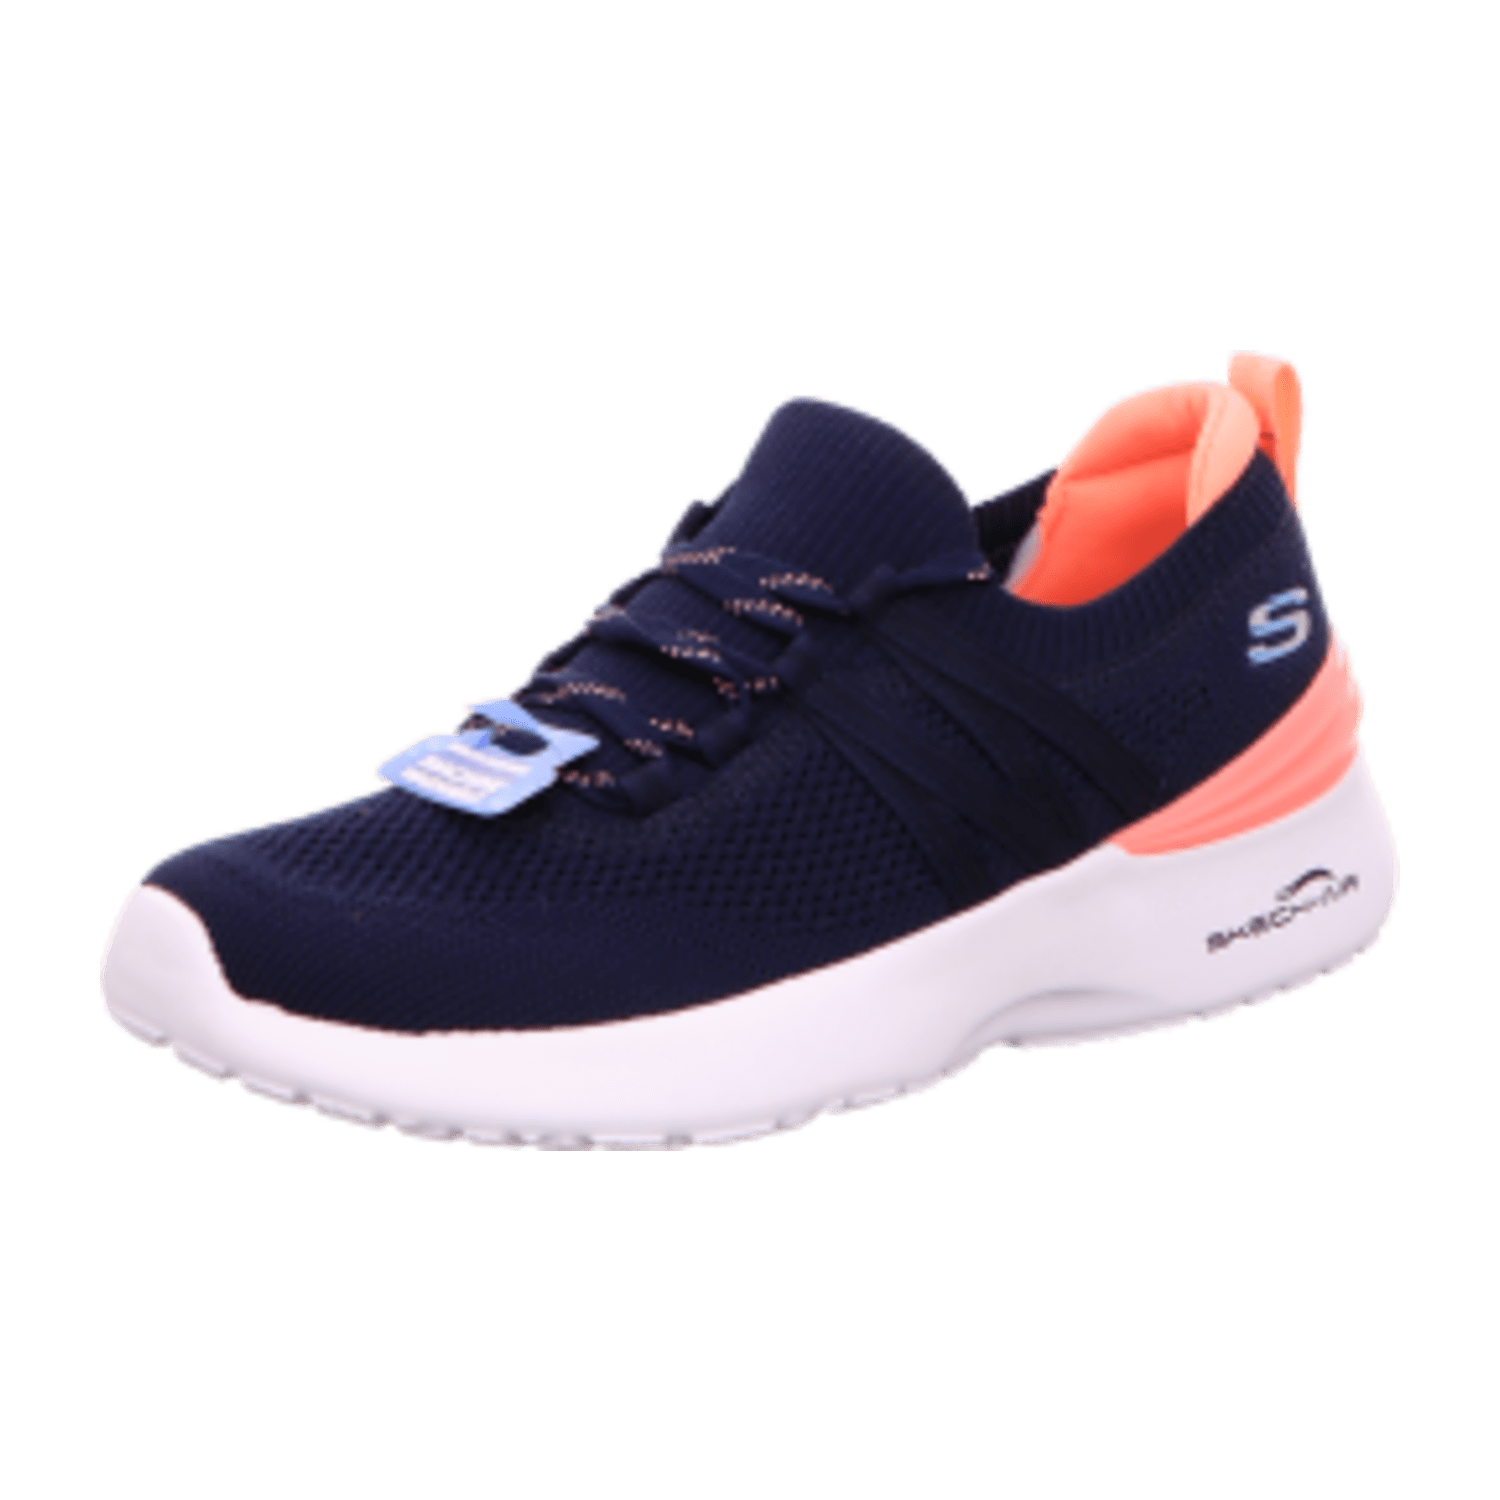 Skechers SKECH-AIR DYNAMIGHT - BRIGHT C